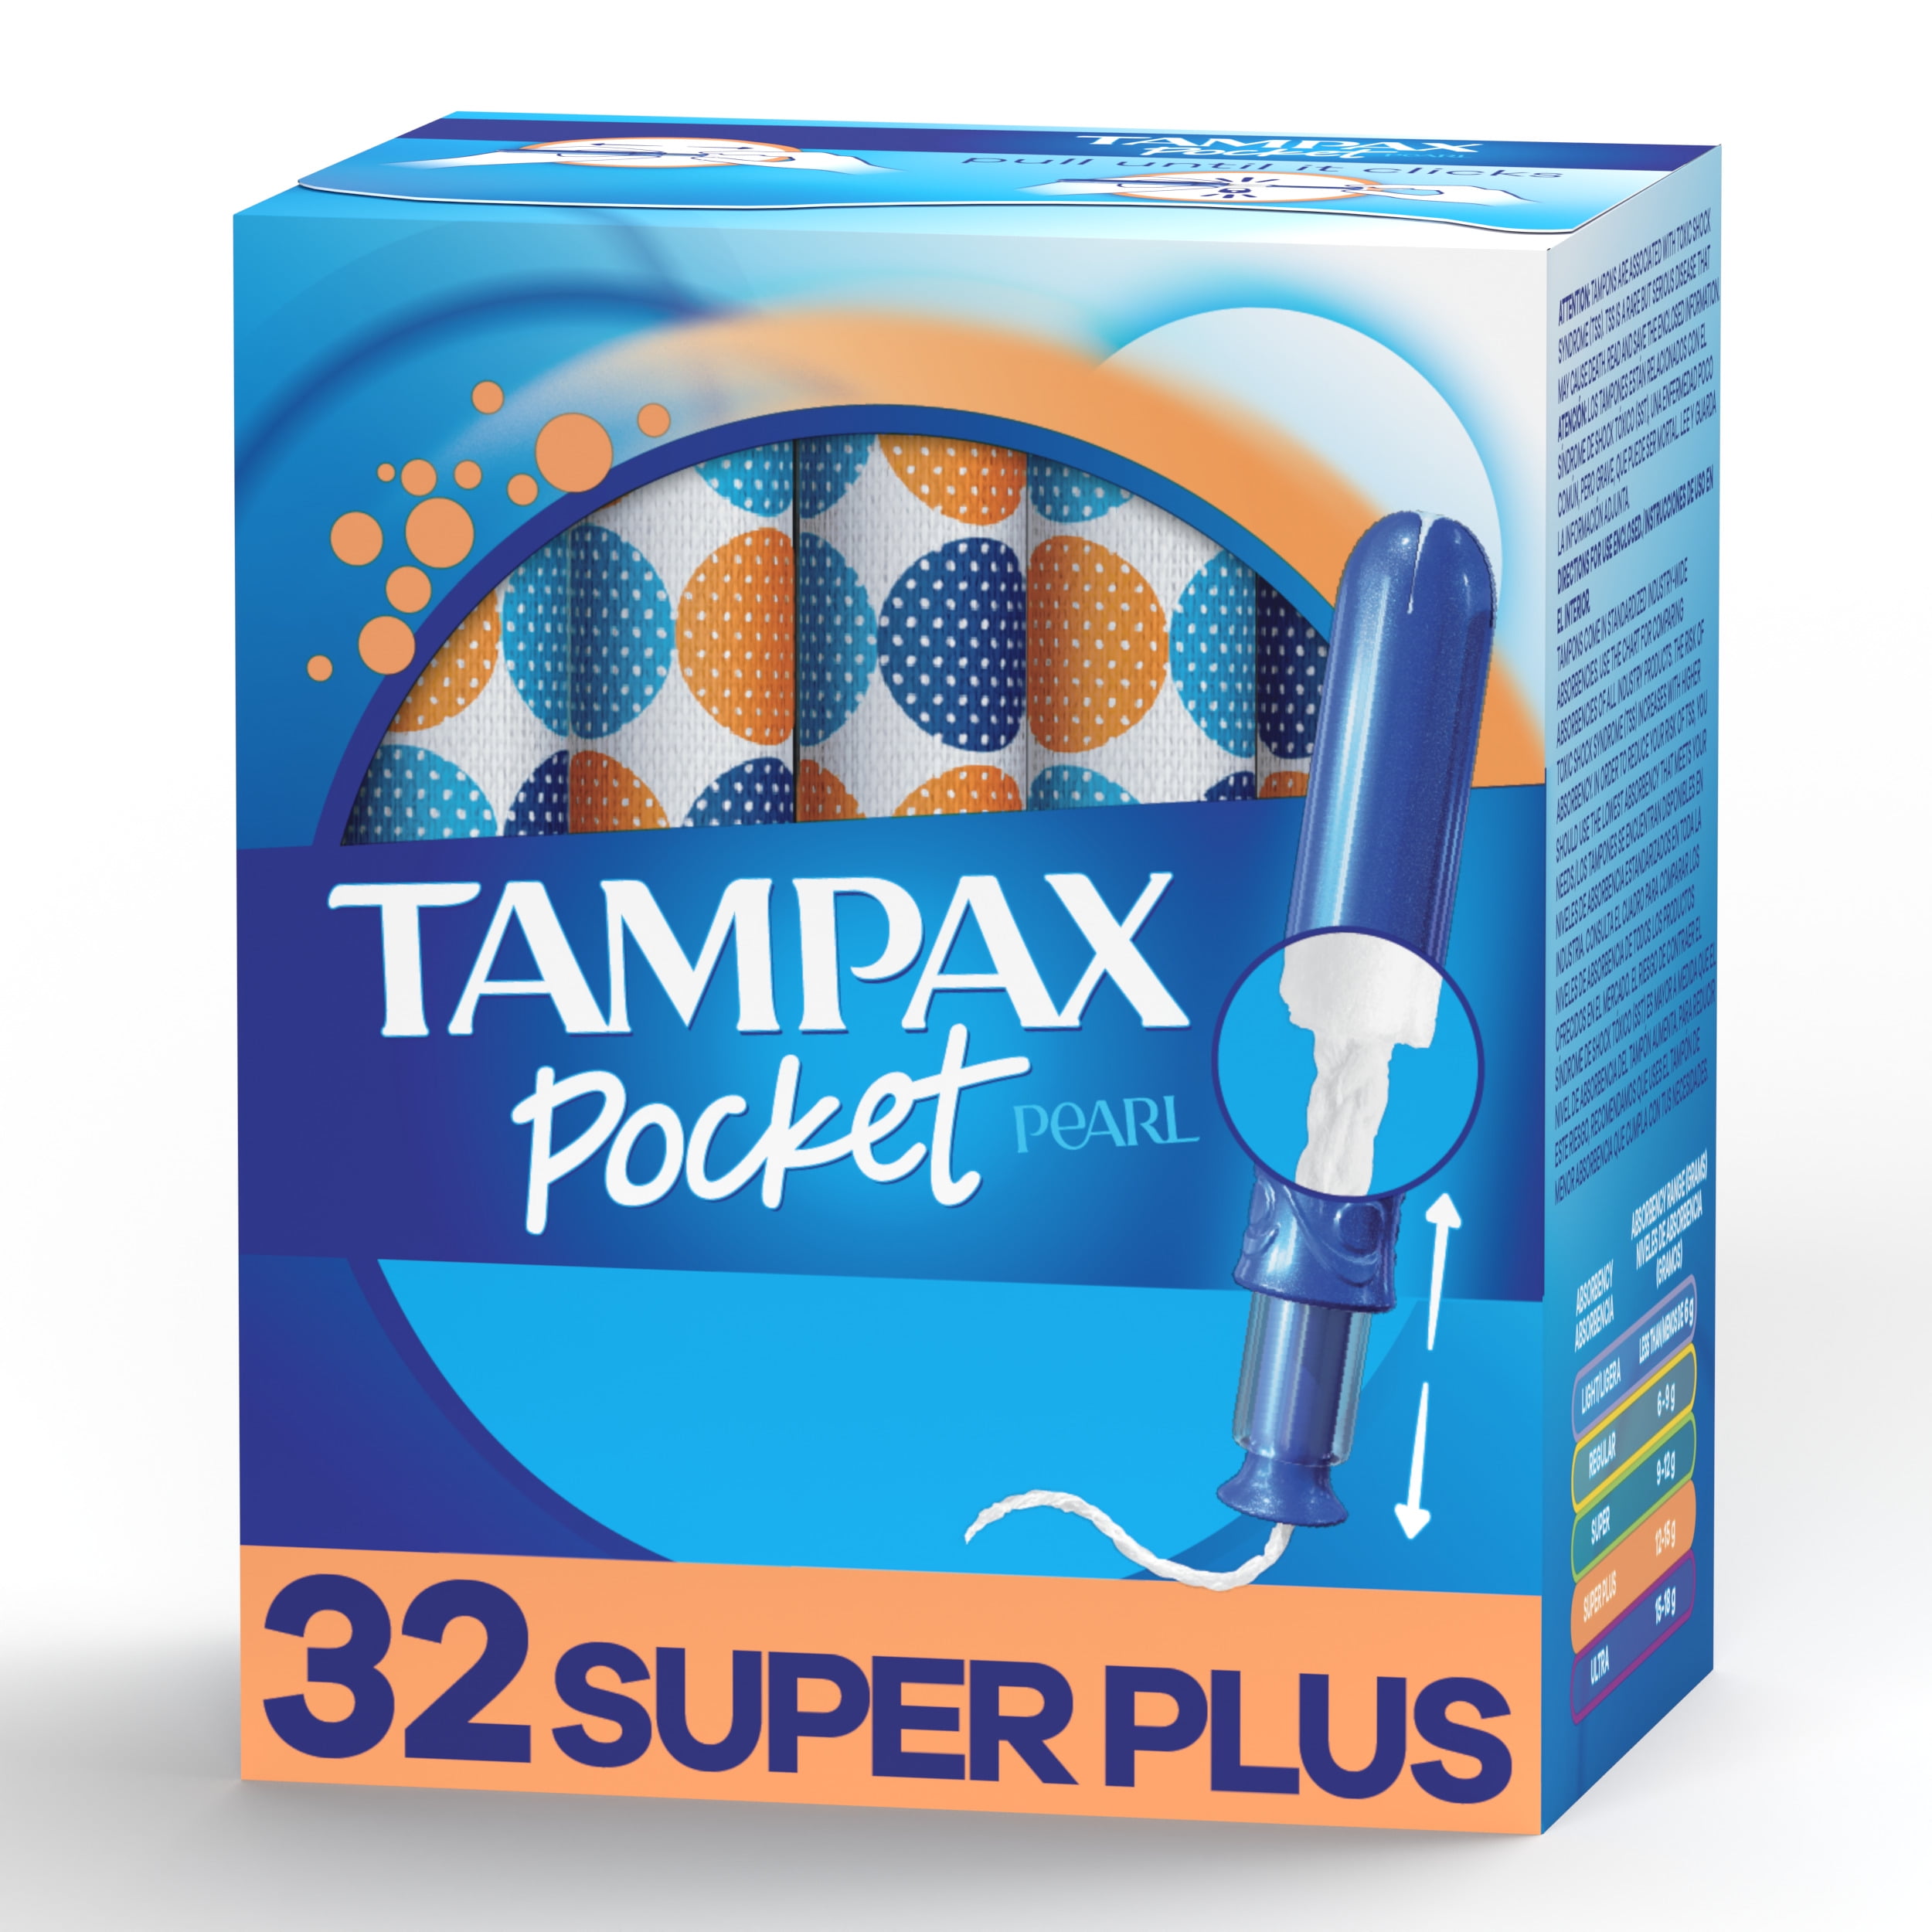 Tampax Pocket Pearl Unscented Regular Tampons, 18 ct - Foods Co.